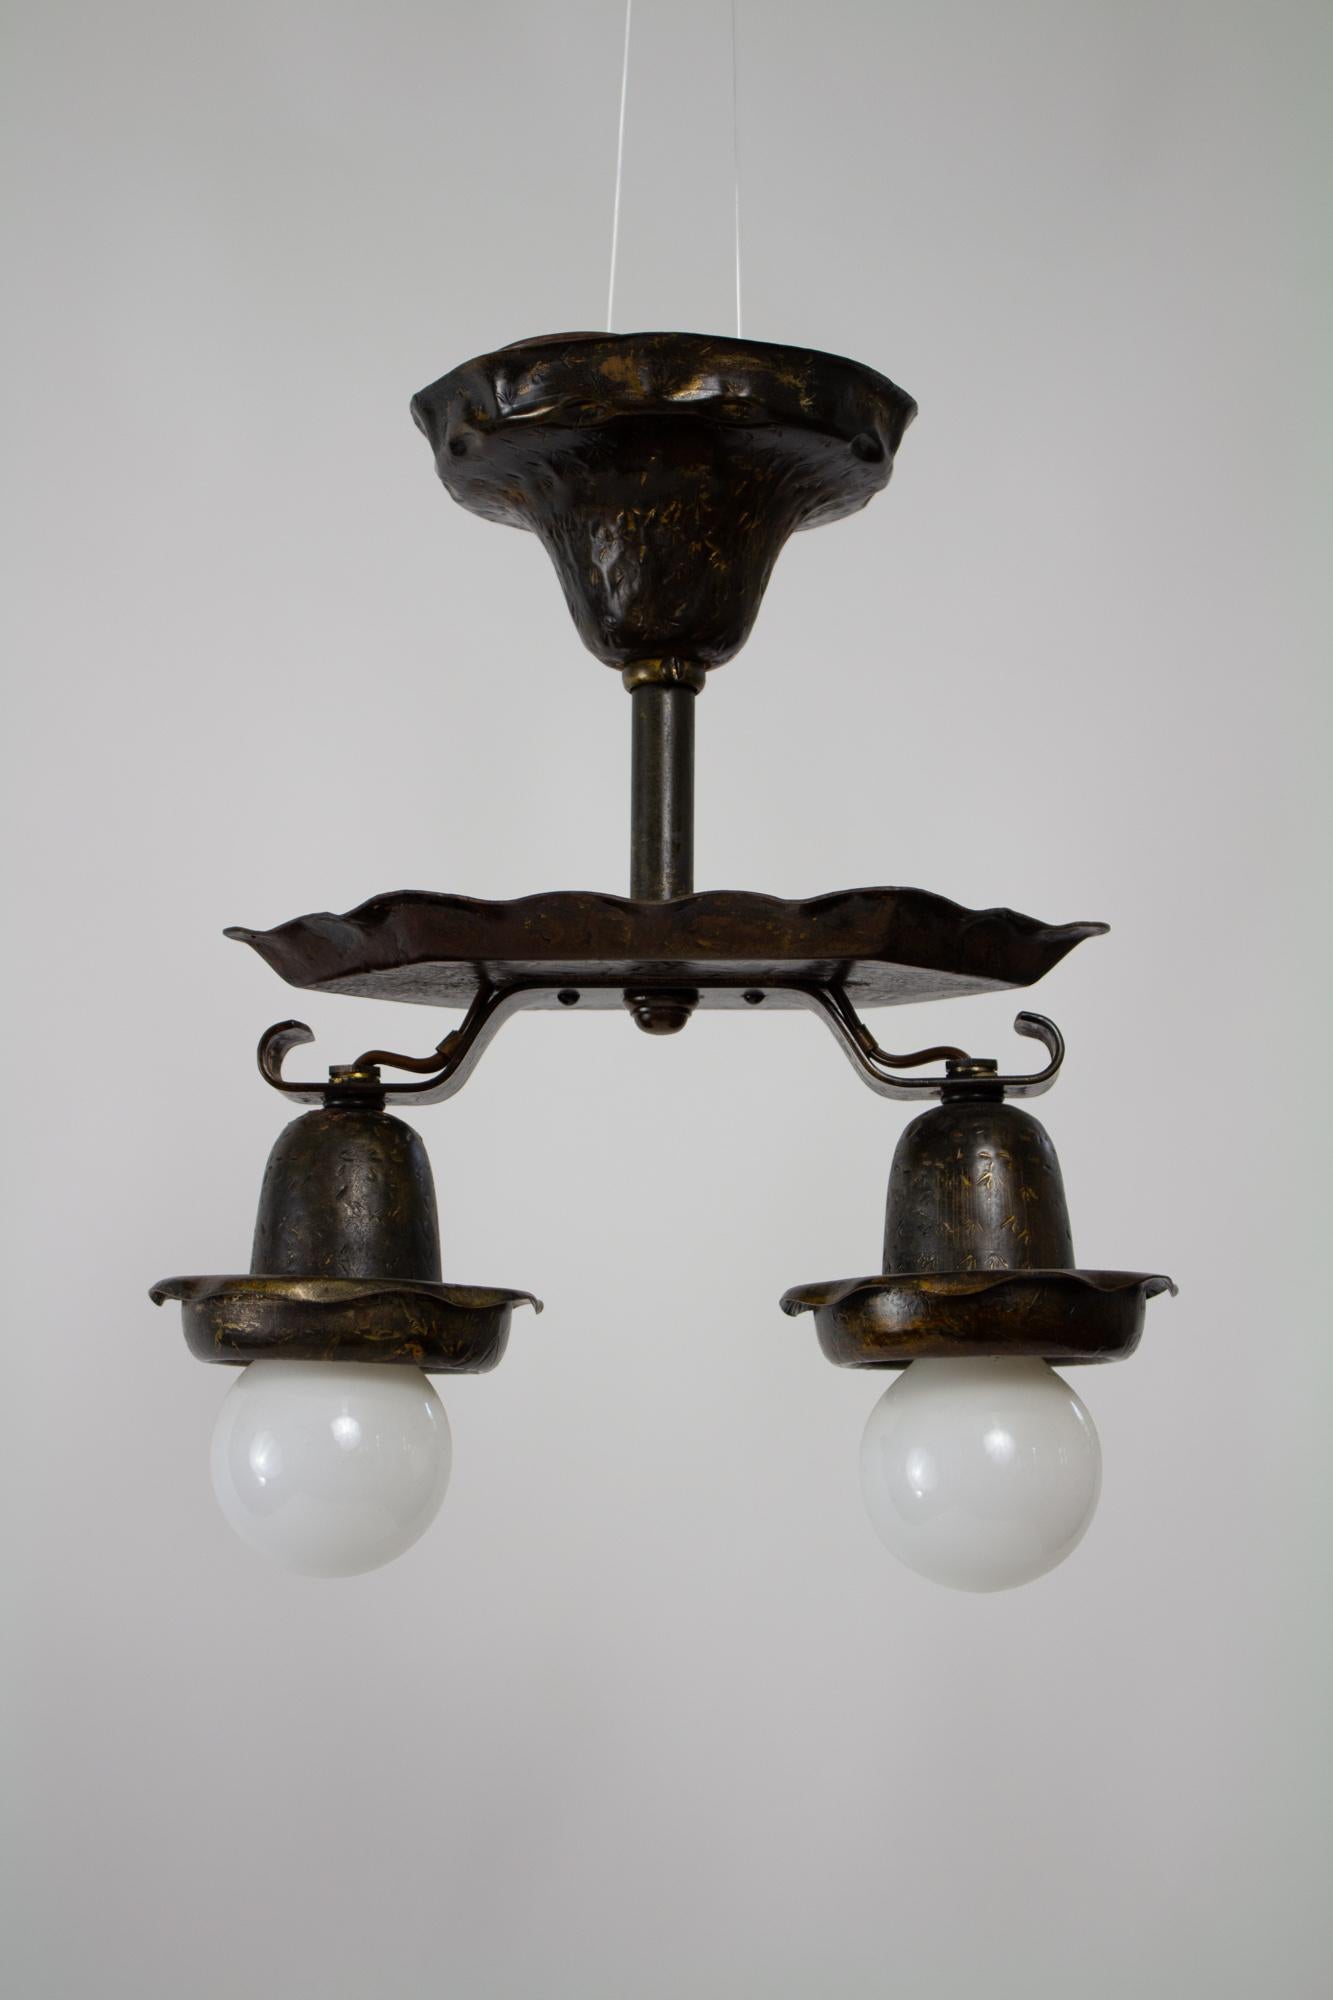 Two light exposed bulb fixture. Flush mount. Original antiqued painted finish, cleaned.  Rewired and setup for installation to modern US electrical box. Attributed to E. F. Caldwell. American, C. 1915.

